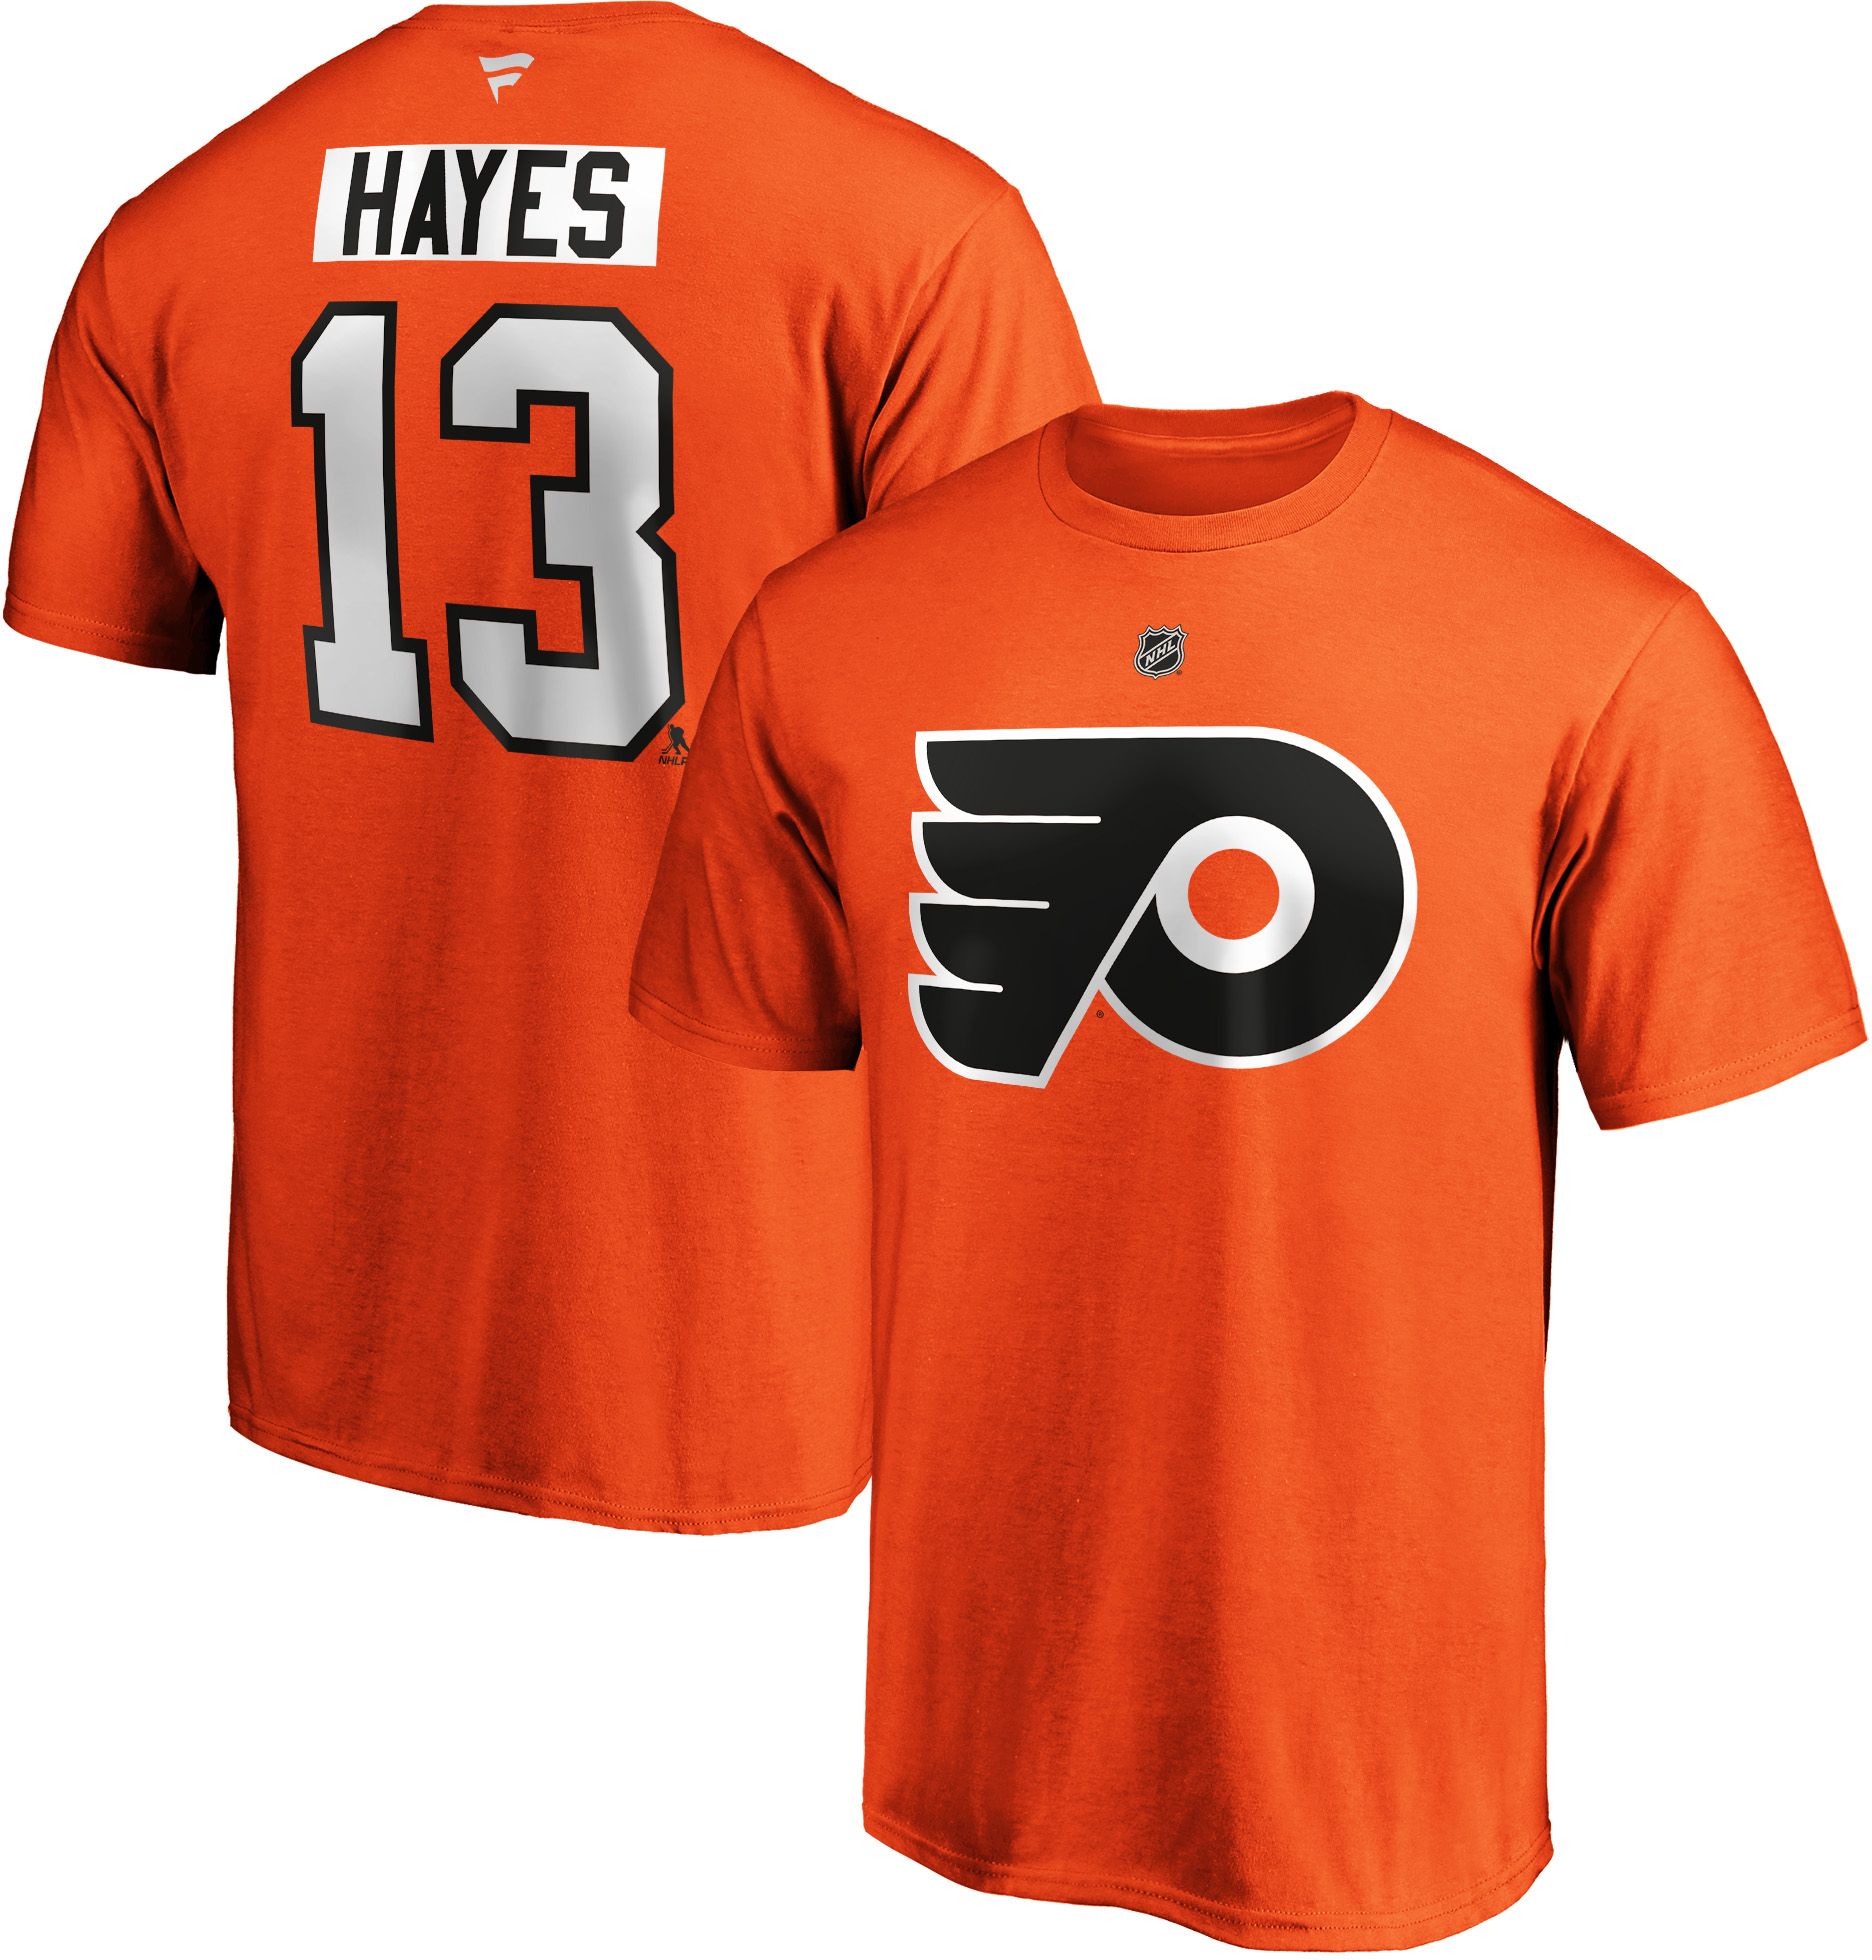 kevin hayes youth jersey